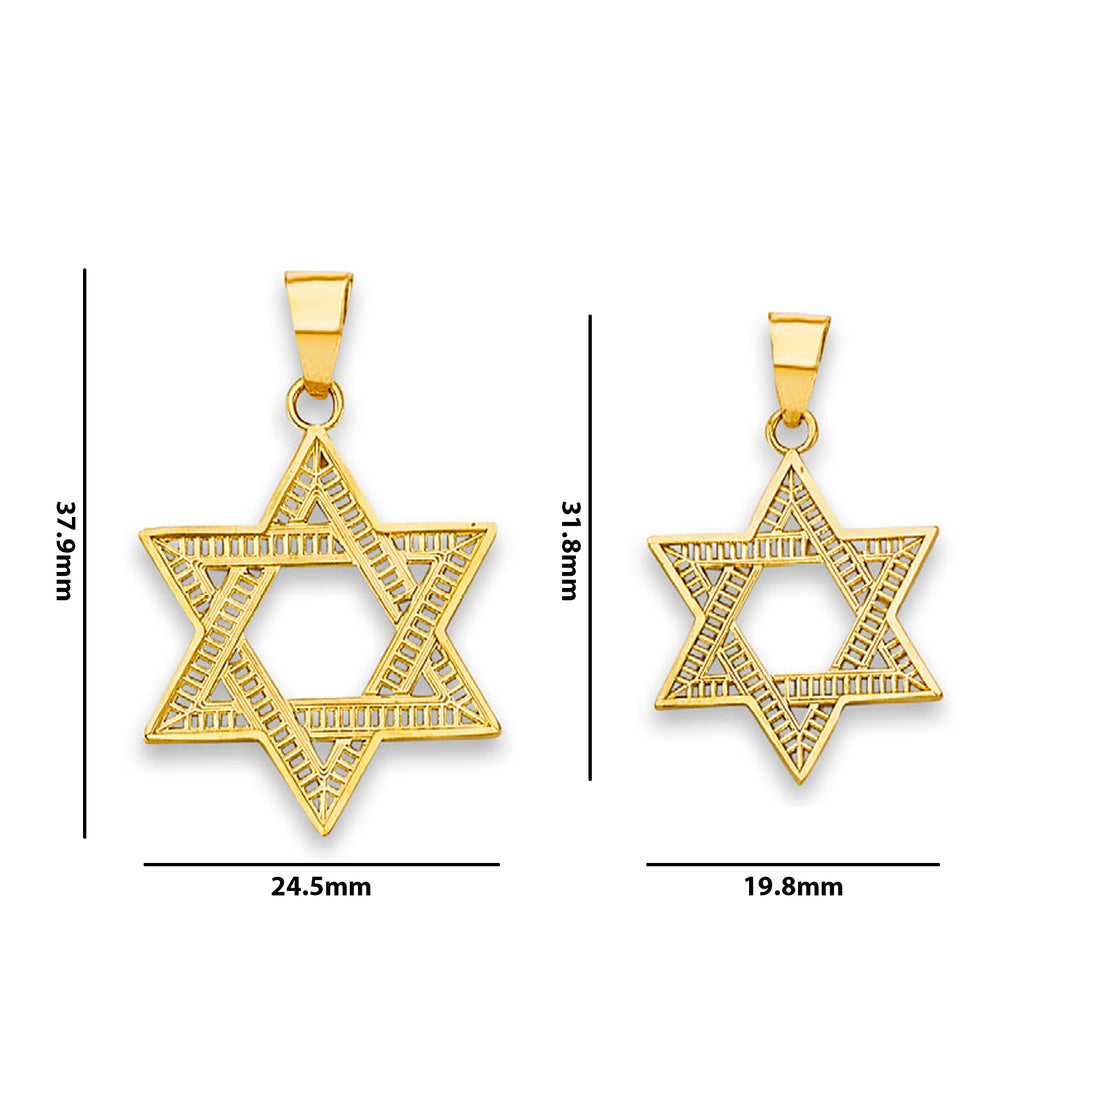 Yellow Gold Open Fancy Star of David Religious Pendant with Measurement